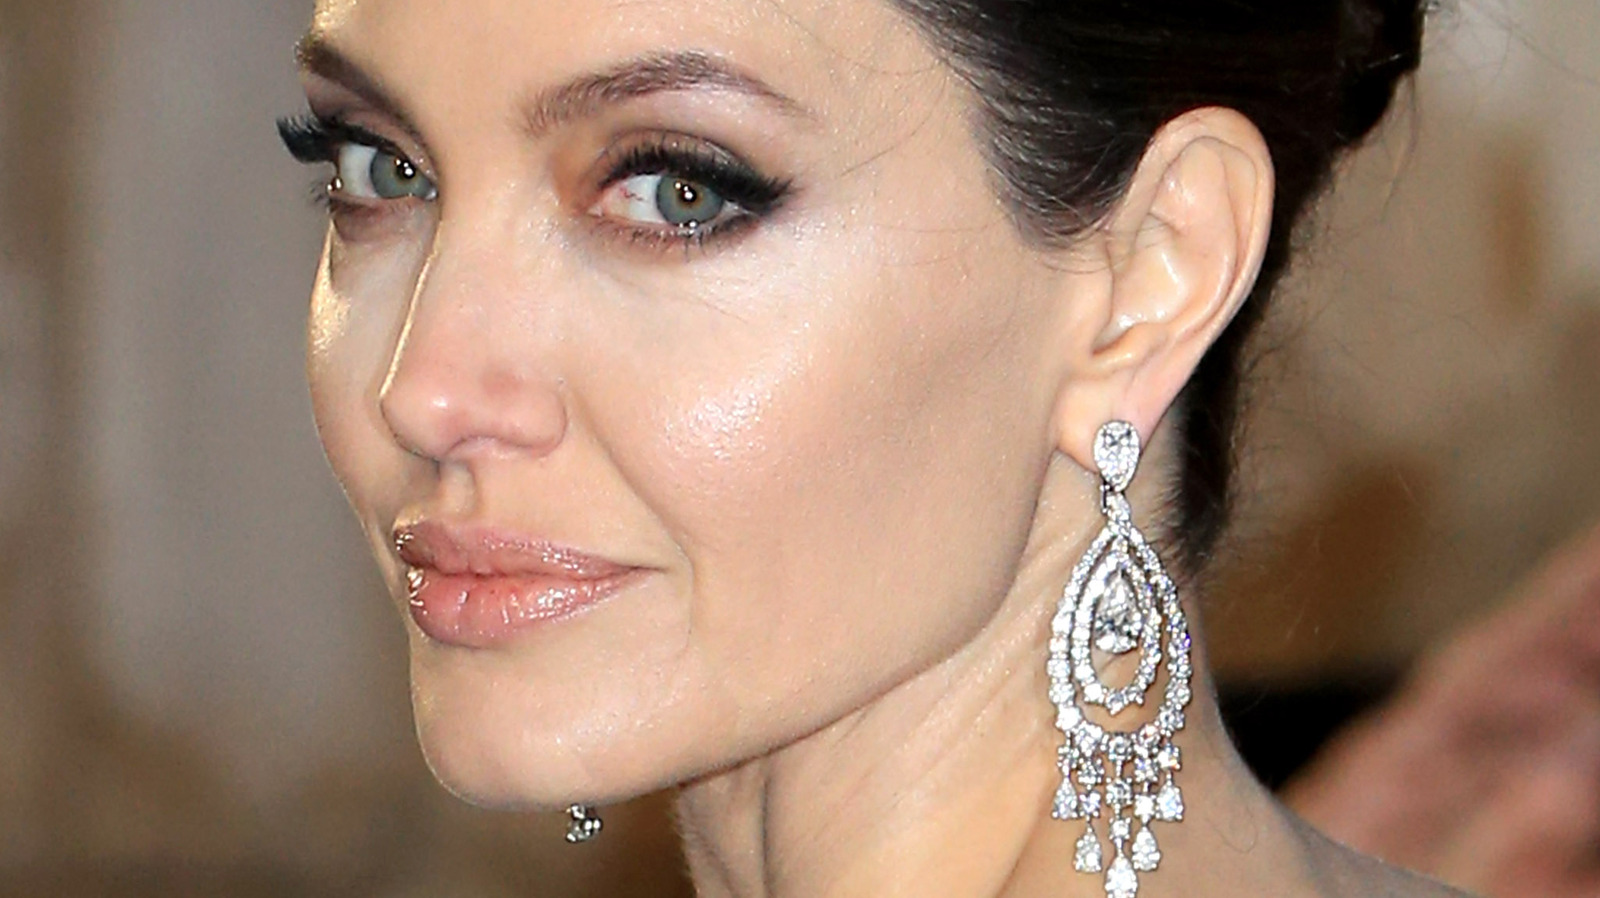 Here's What Jolie Looks Without